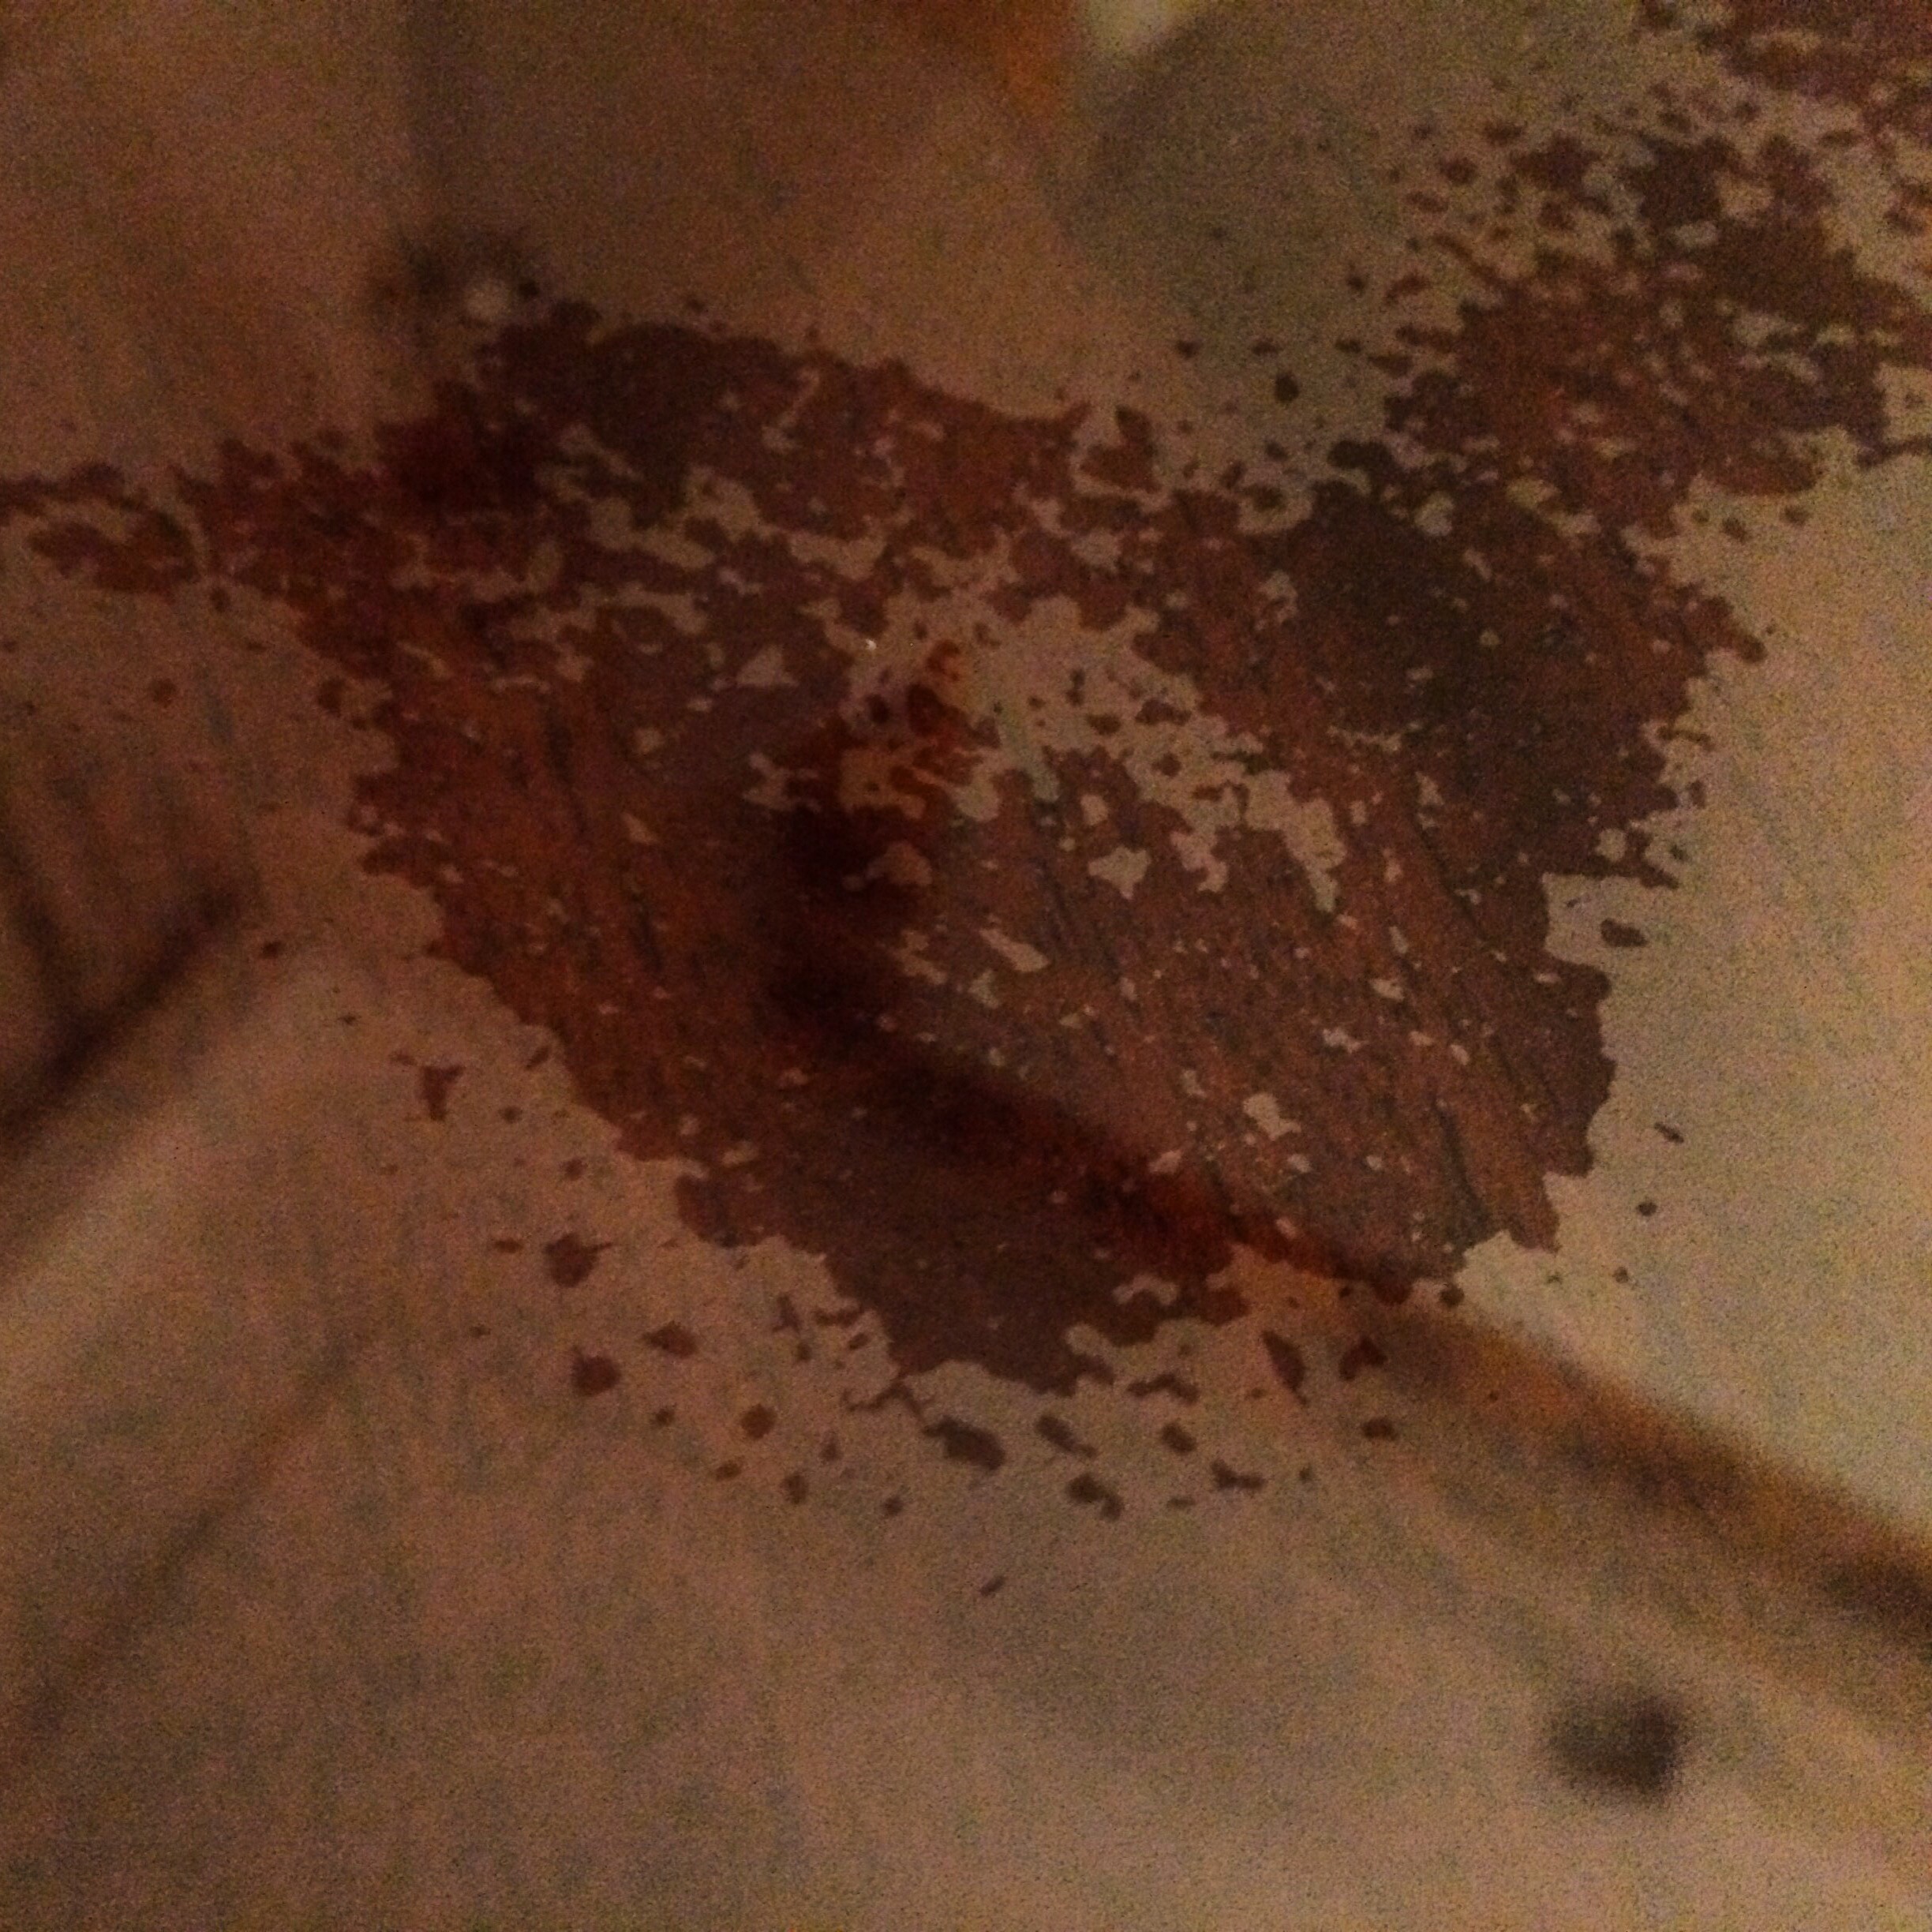 a stain on a glass surface